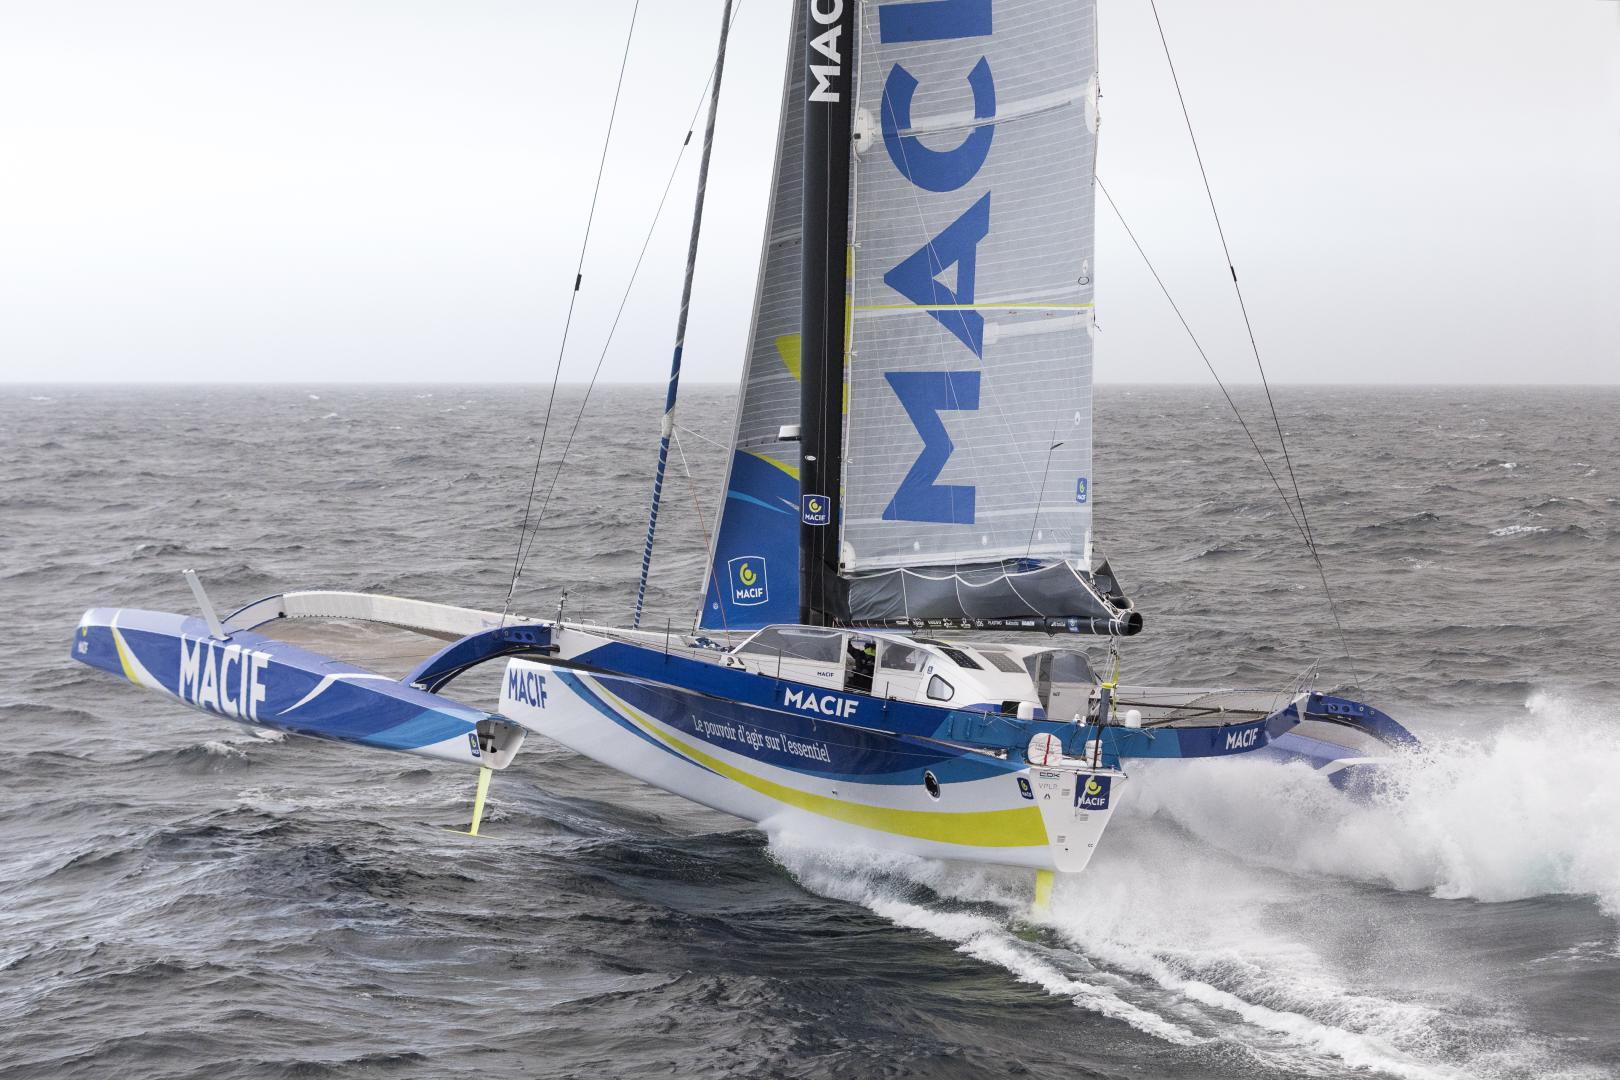 Round the world solo: François Gabart and the MACIF trimaran are off!